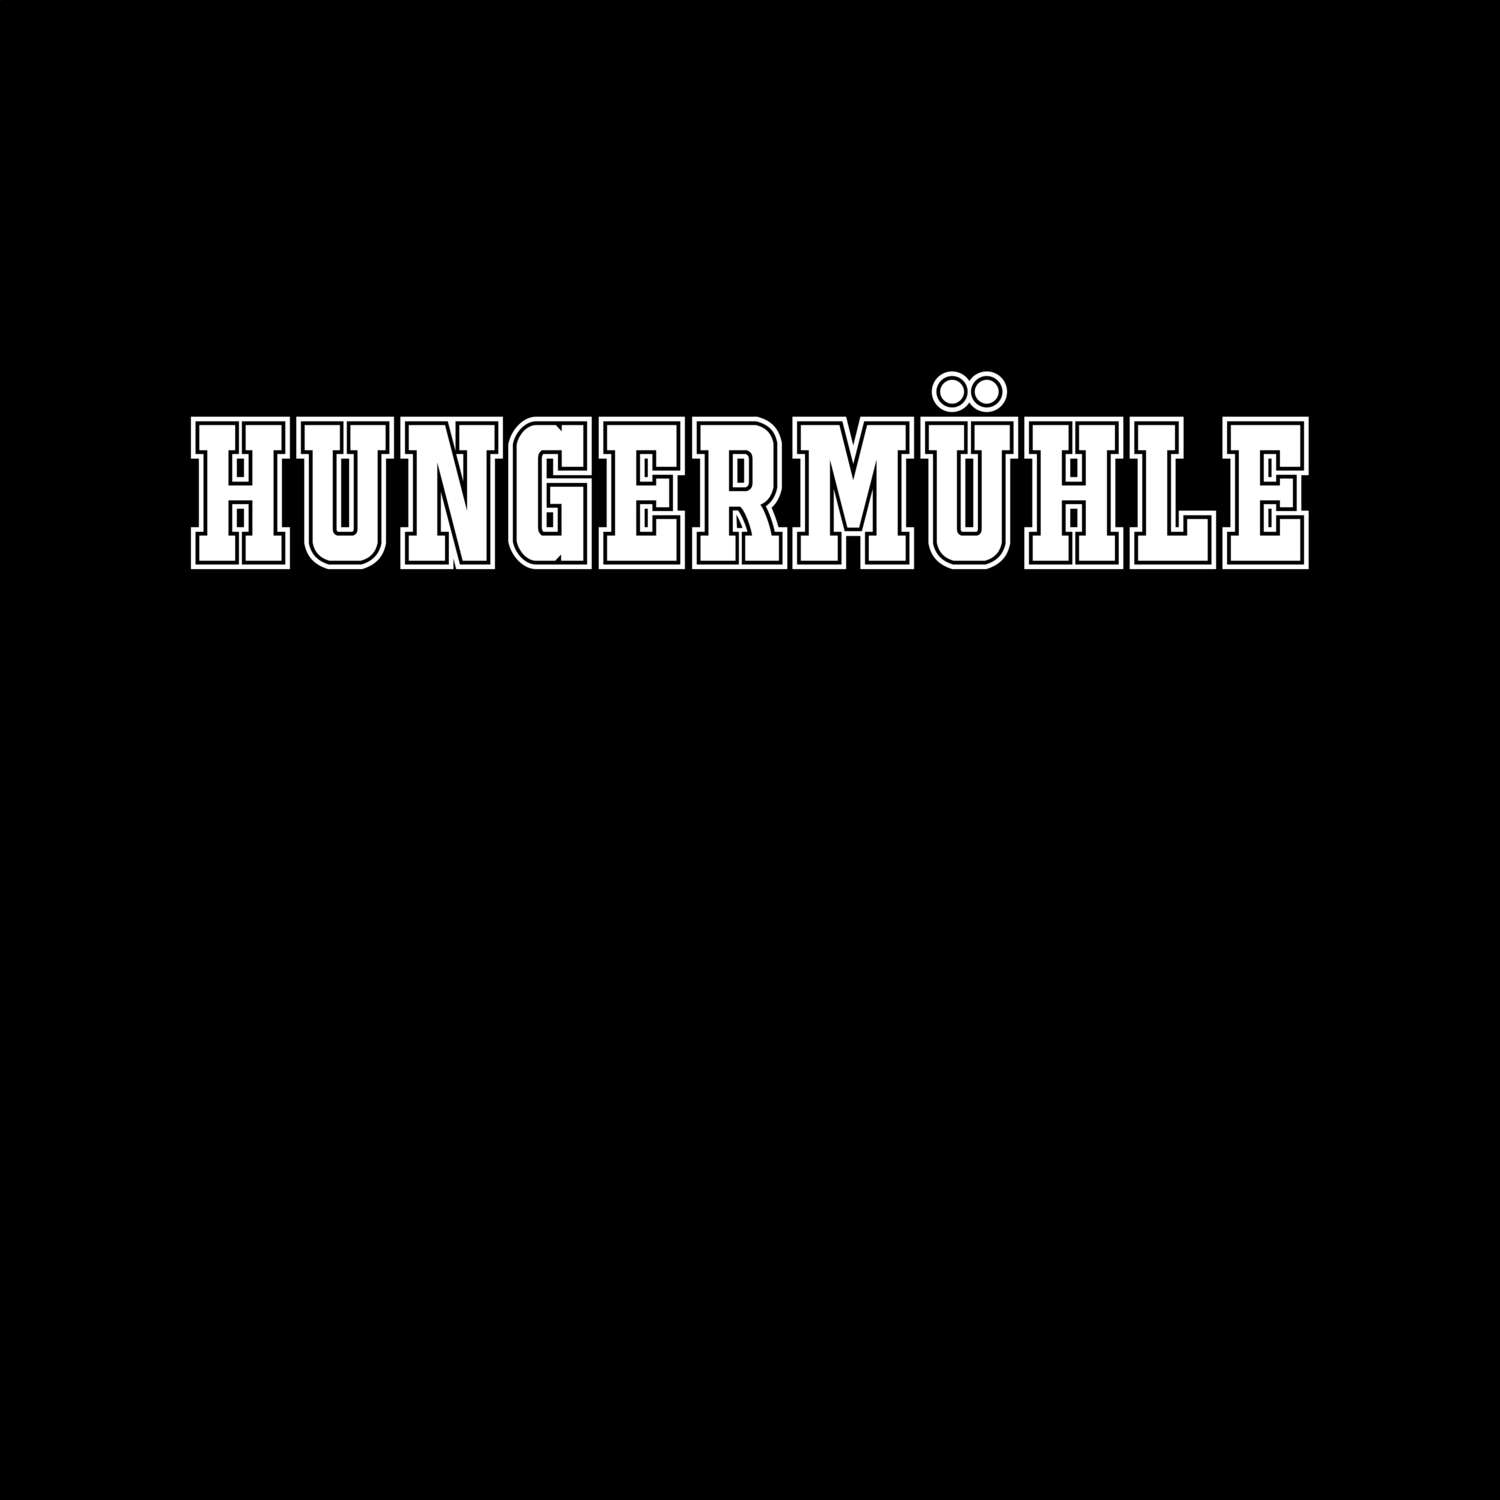 Hungermühle T-Shirt »Classic«